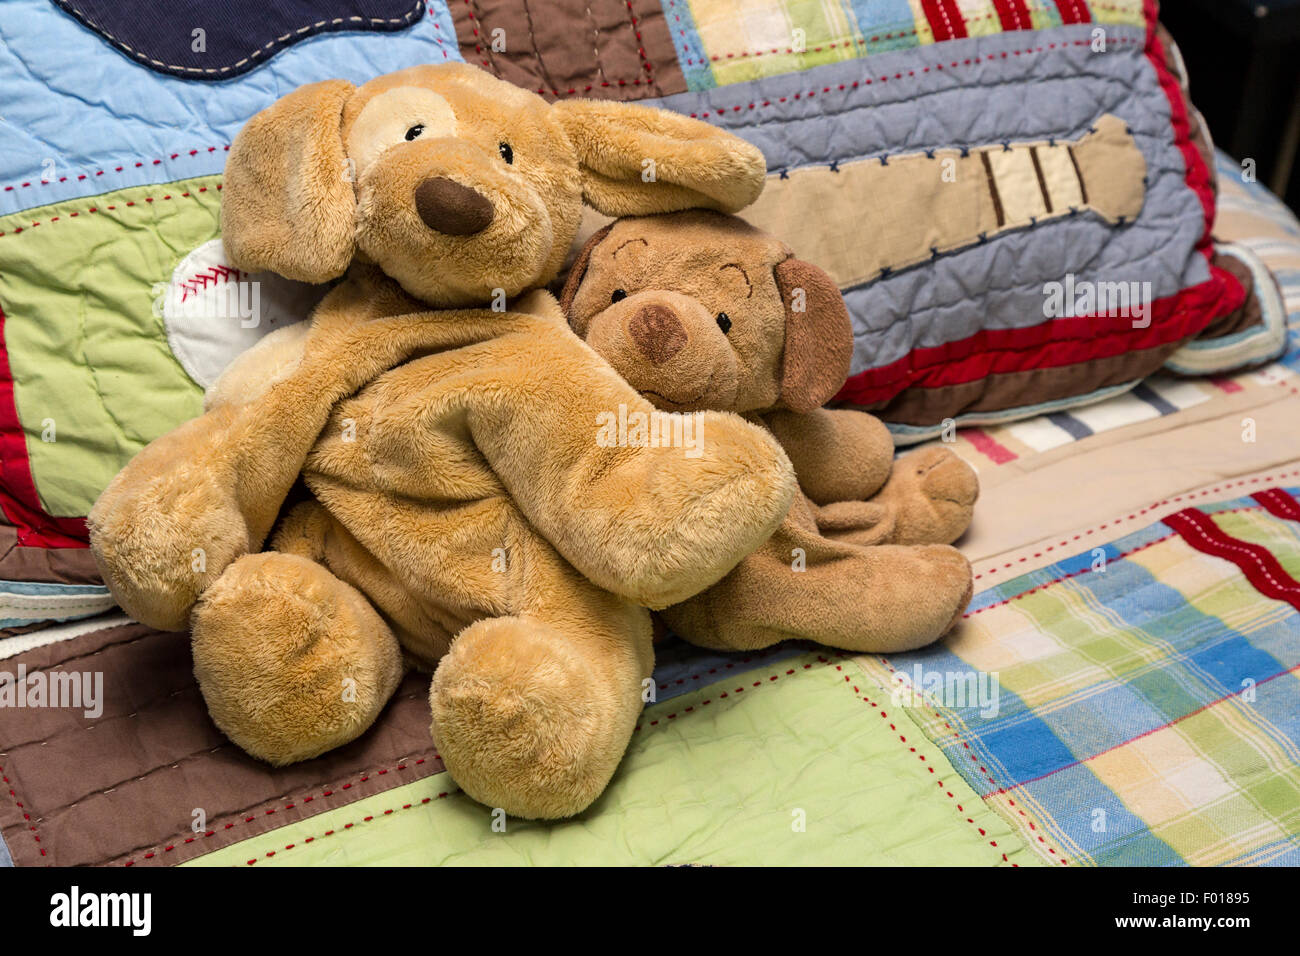 Seven-year-old Boy's Stuffed Dogs, 'Ruffy #1' and Number 2. Stock Photo